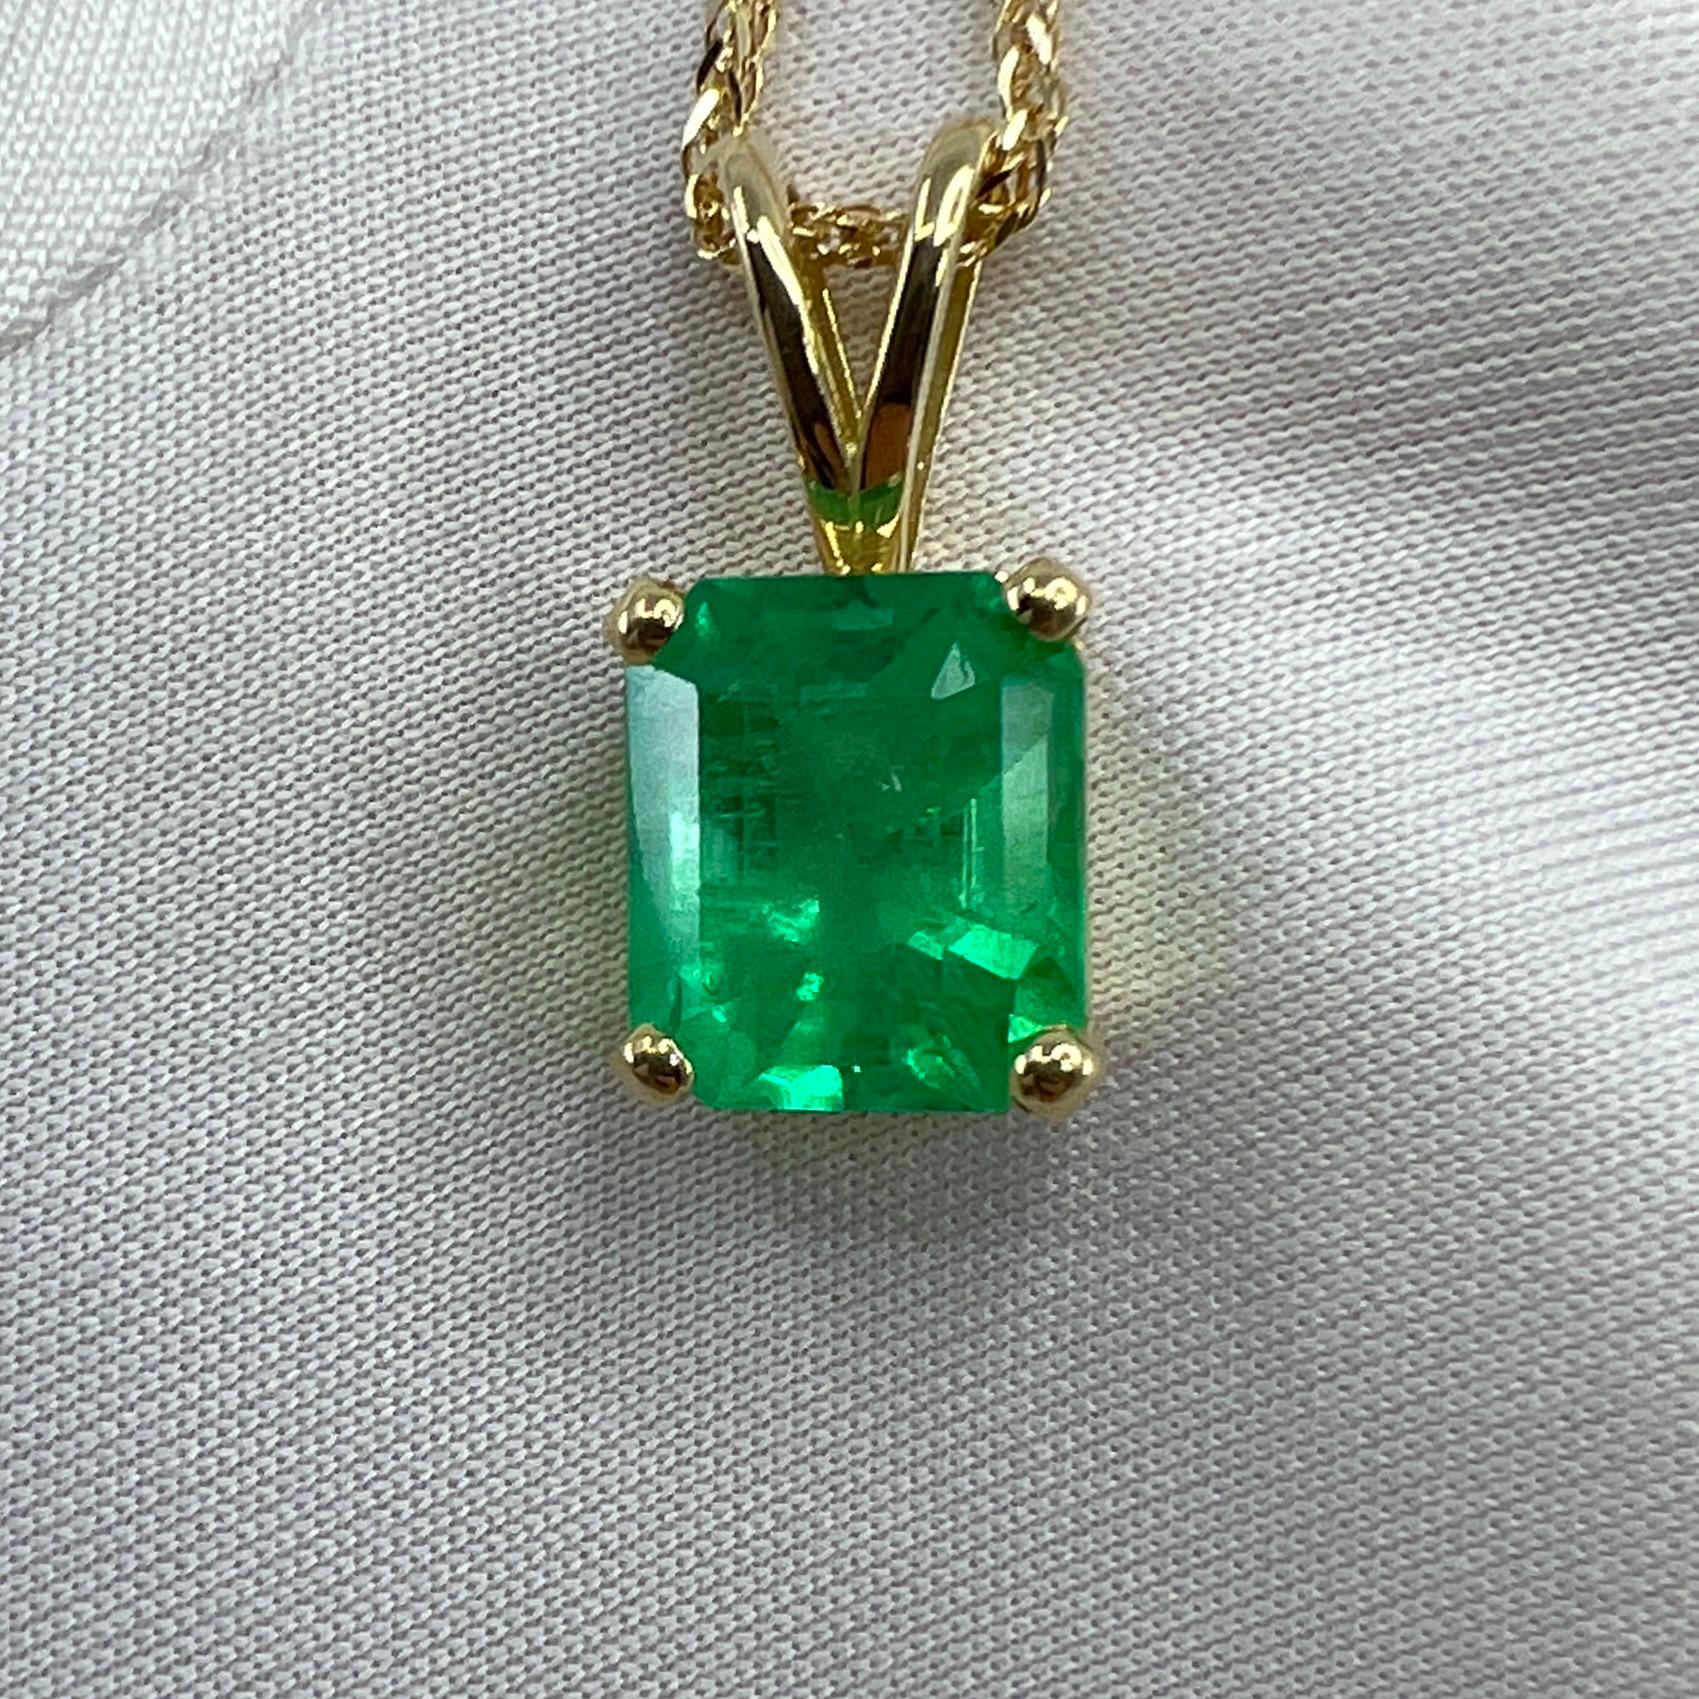 Women's or Men's GIA Certified 3.32ct Vivid Green Colombian Emerald 18k Gold Pendant Necklace